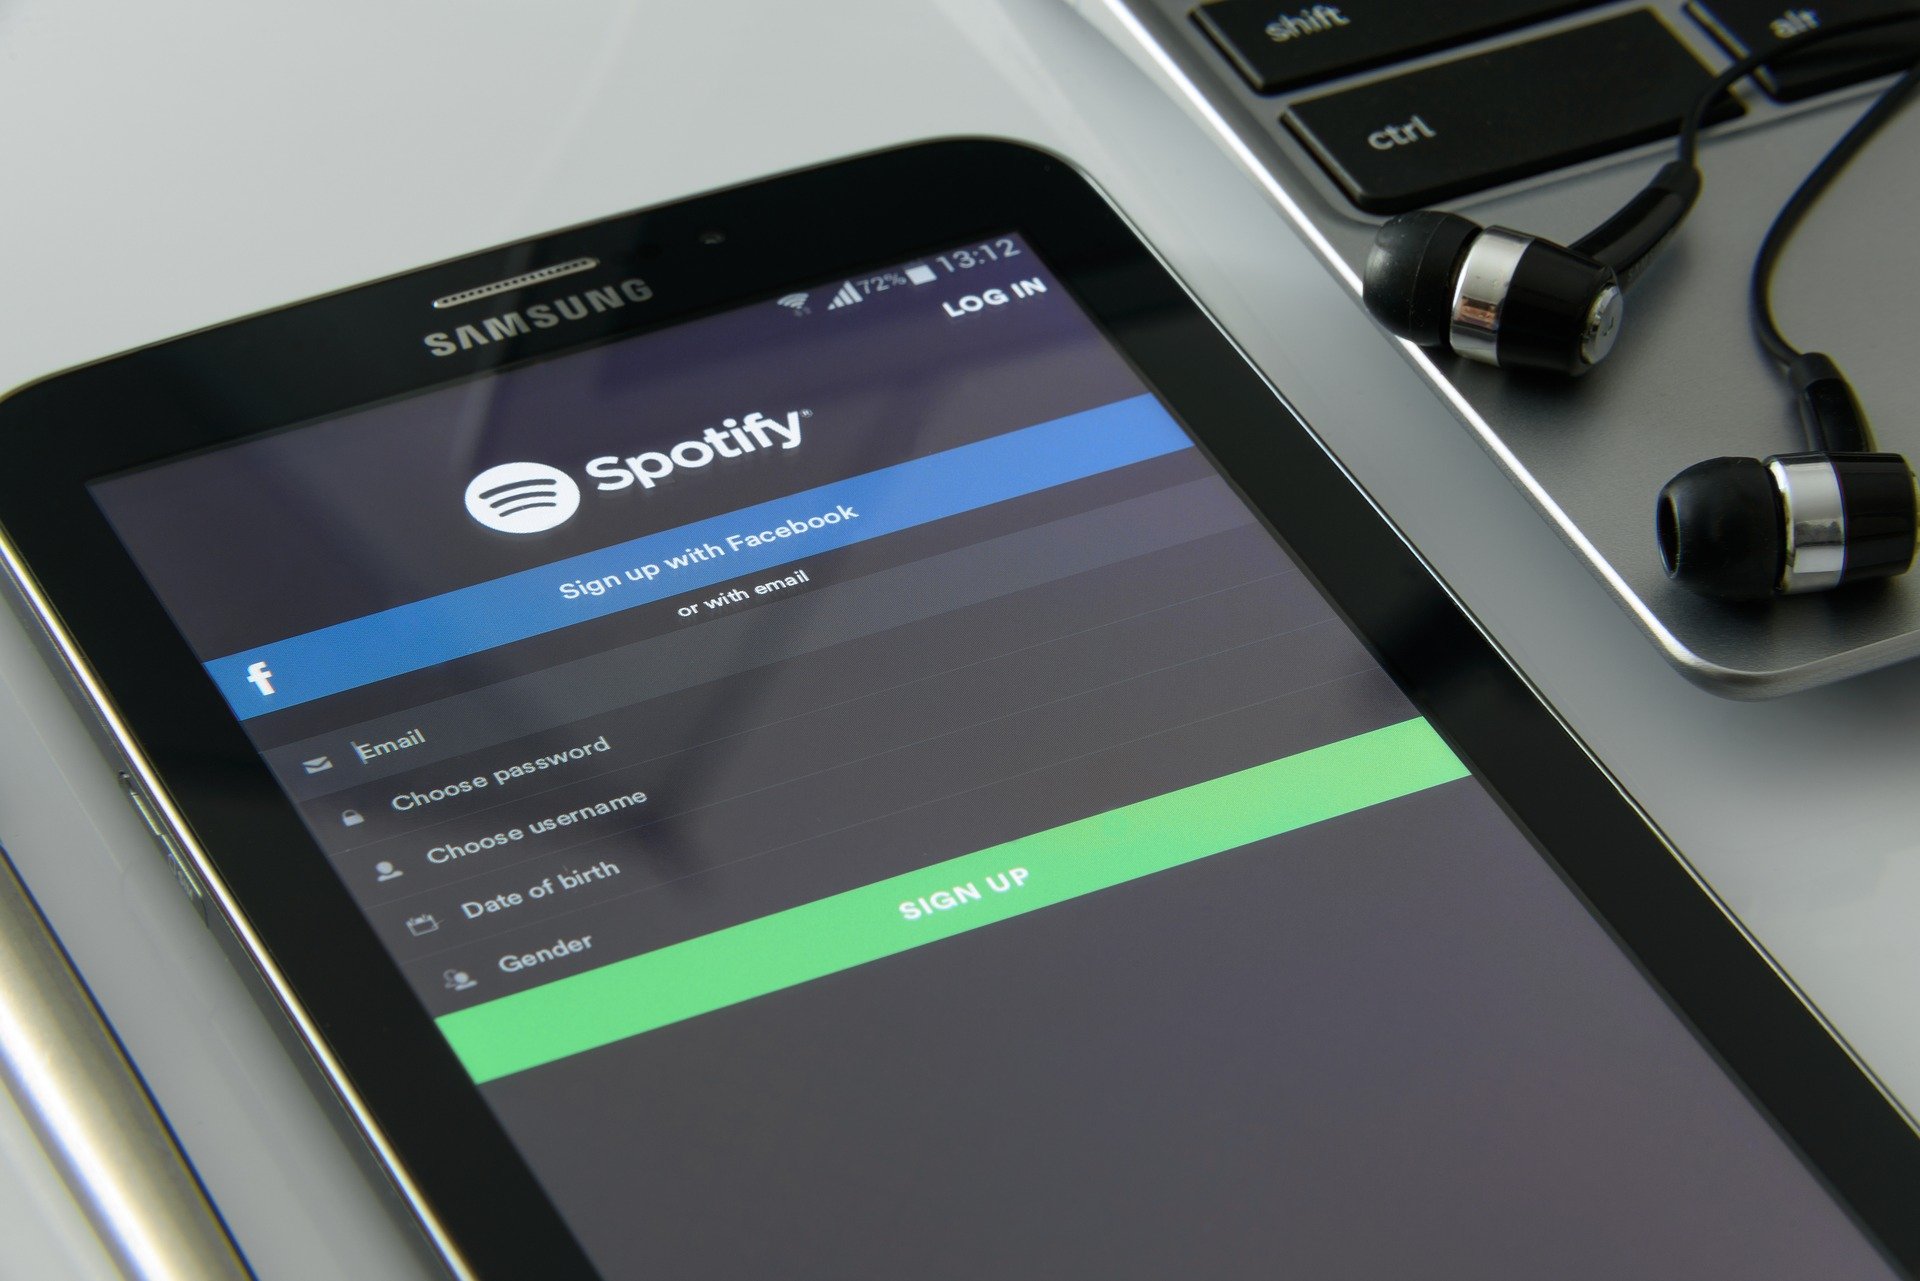 Spotify is going to try NFTs on its platform
